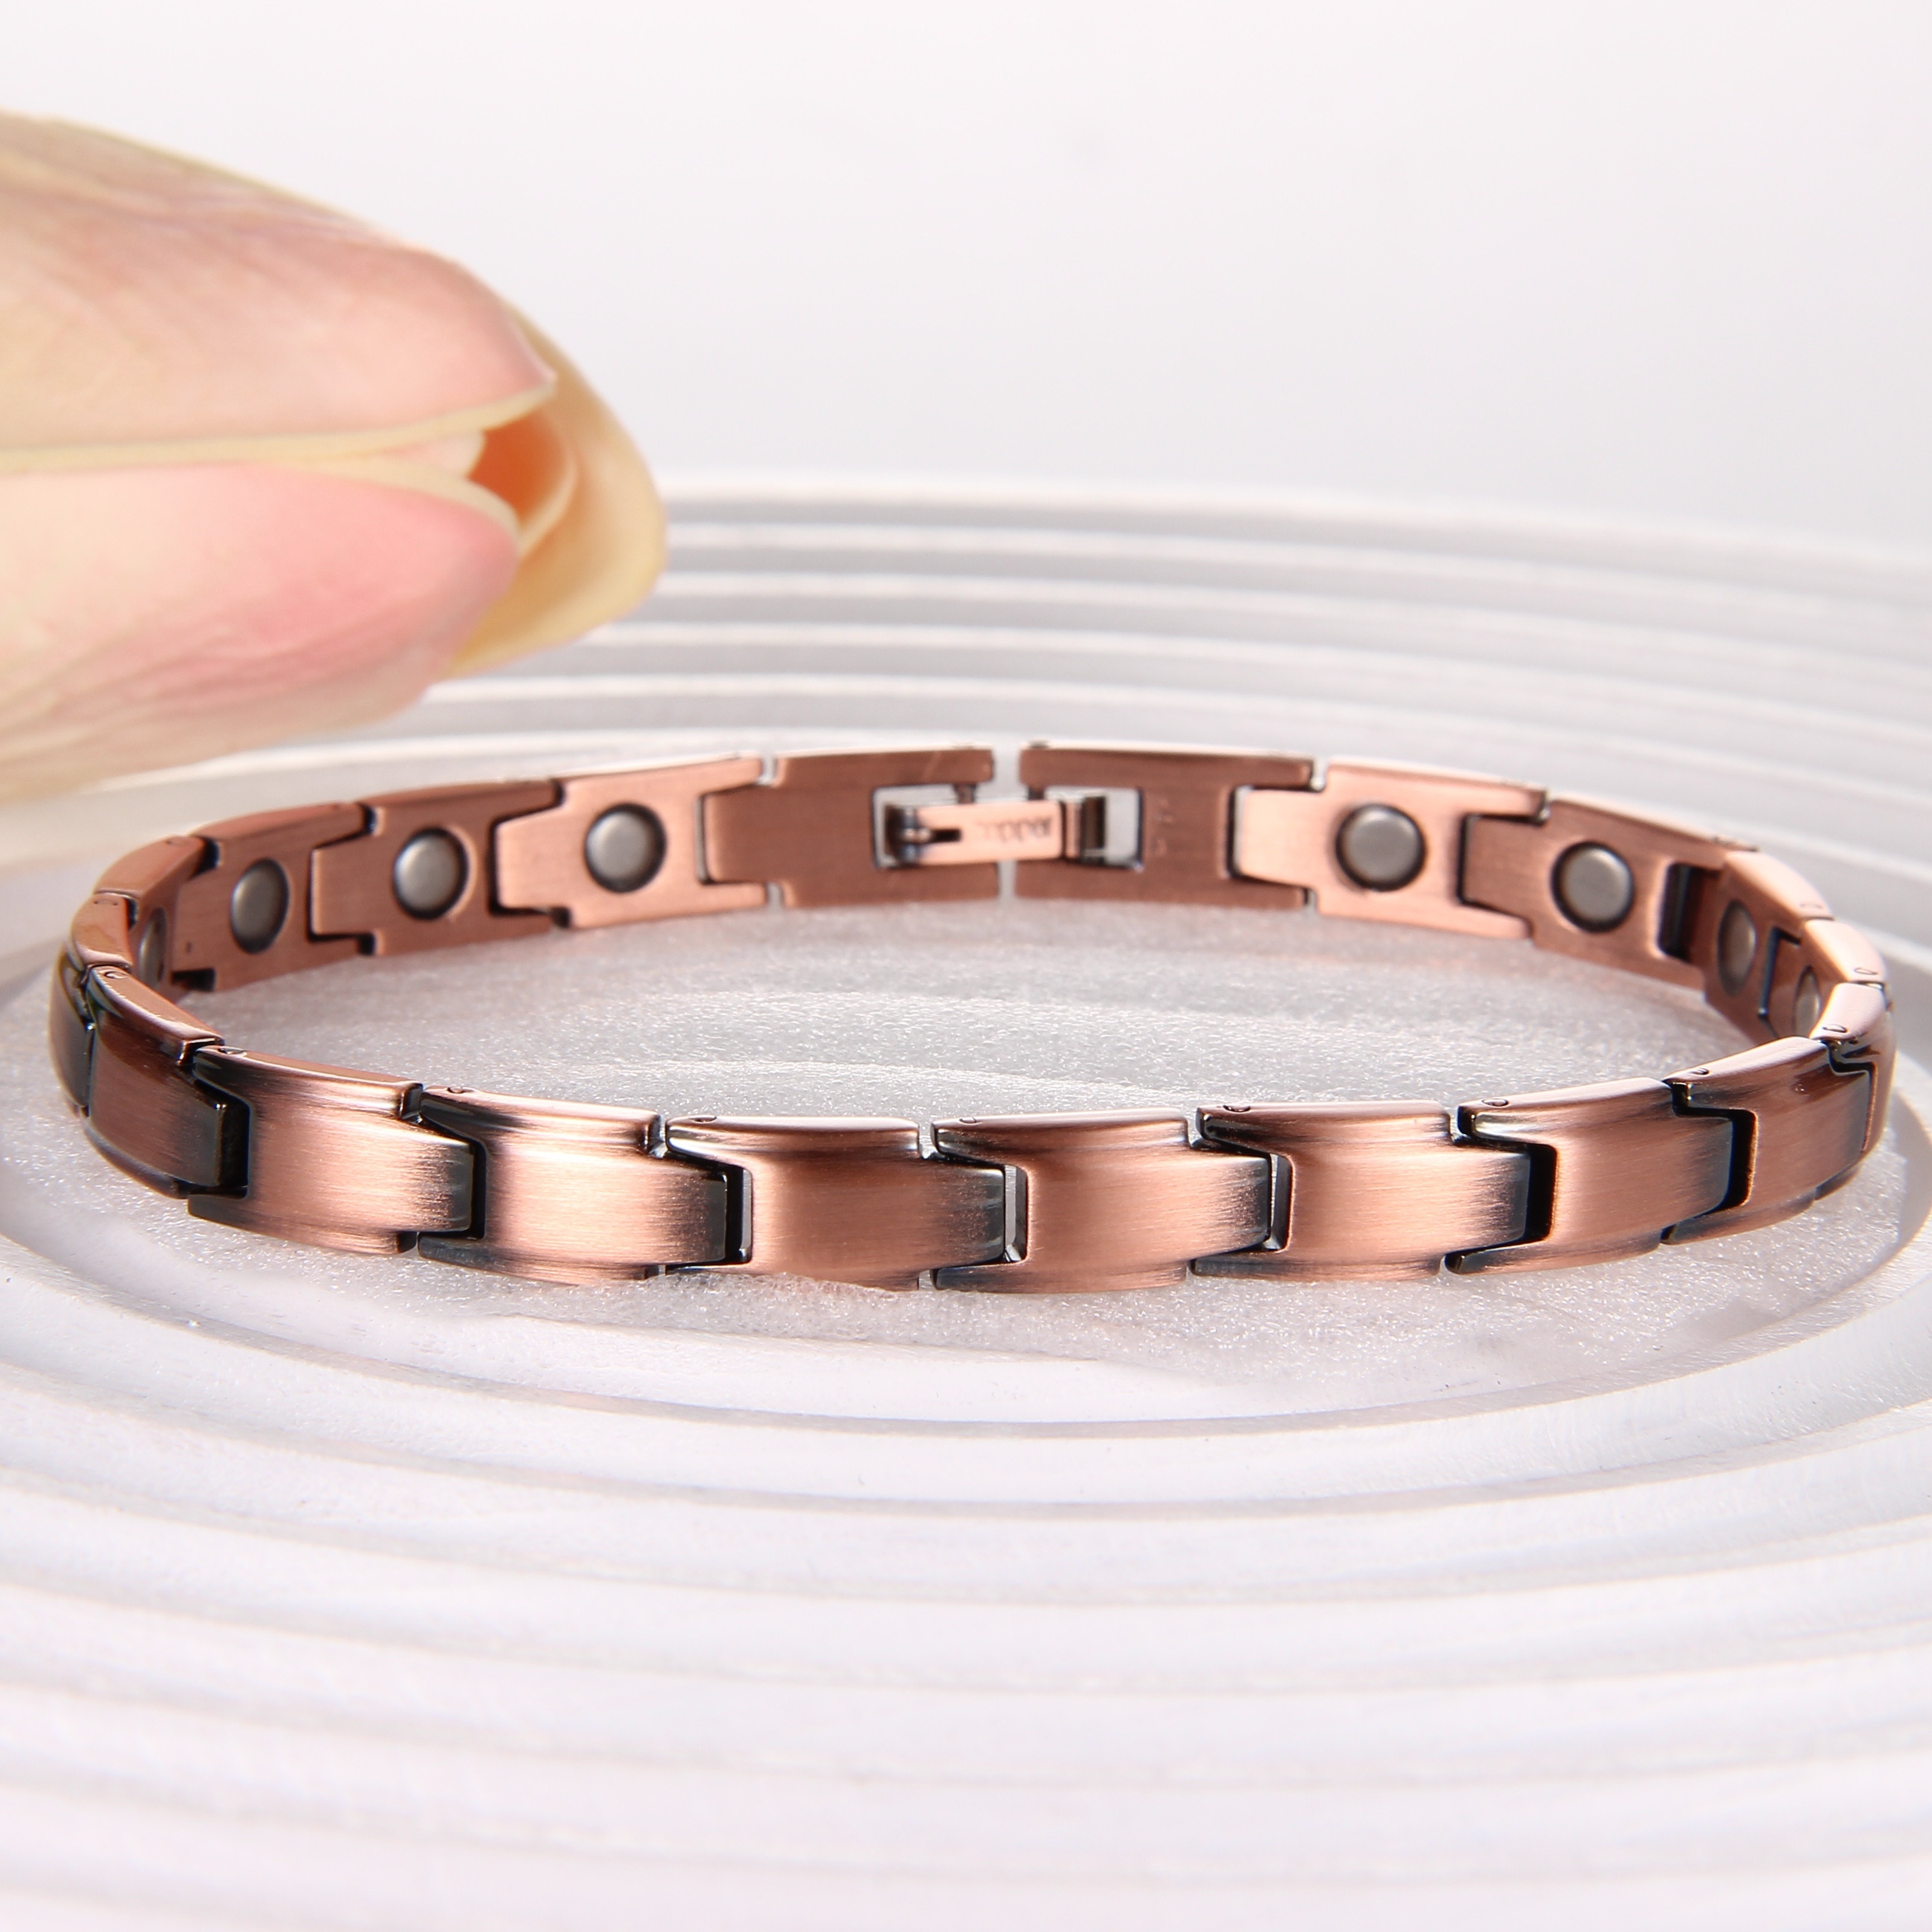 Magnetic Copper Bracelet Healing Therapy Arthritis Pain Relief